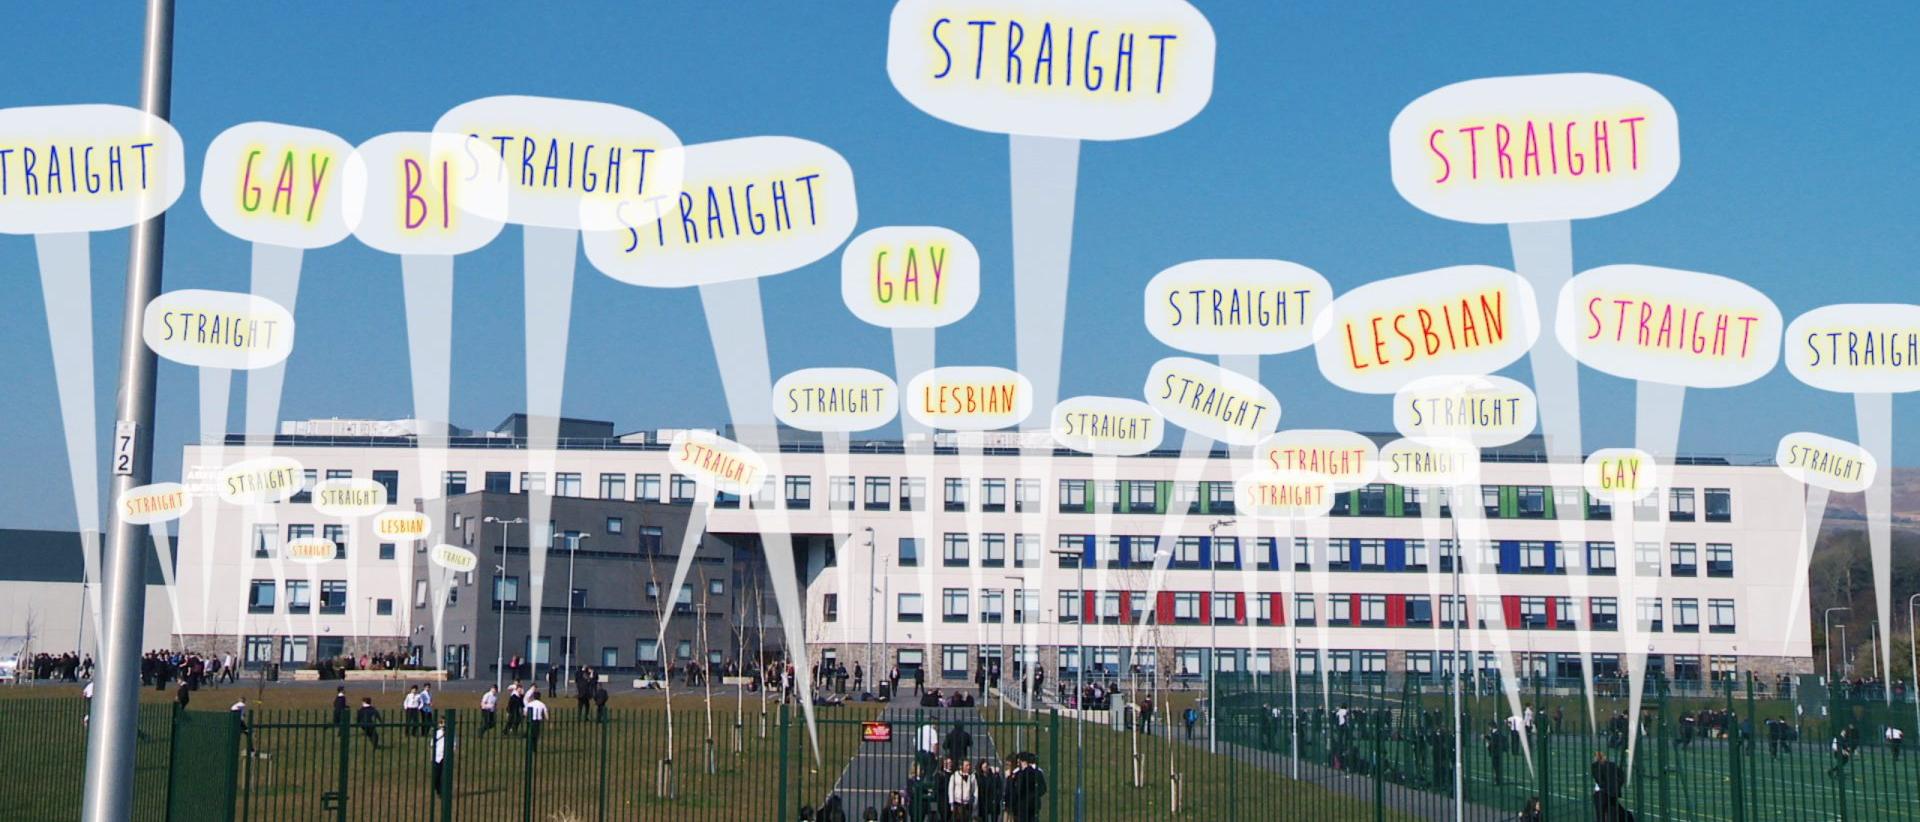 a still from an iris prize education project film featuring a school with animated speech bubbles over the top identifying students' sexuality.